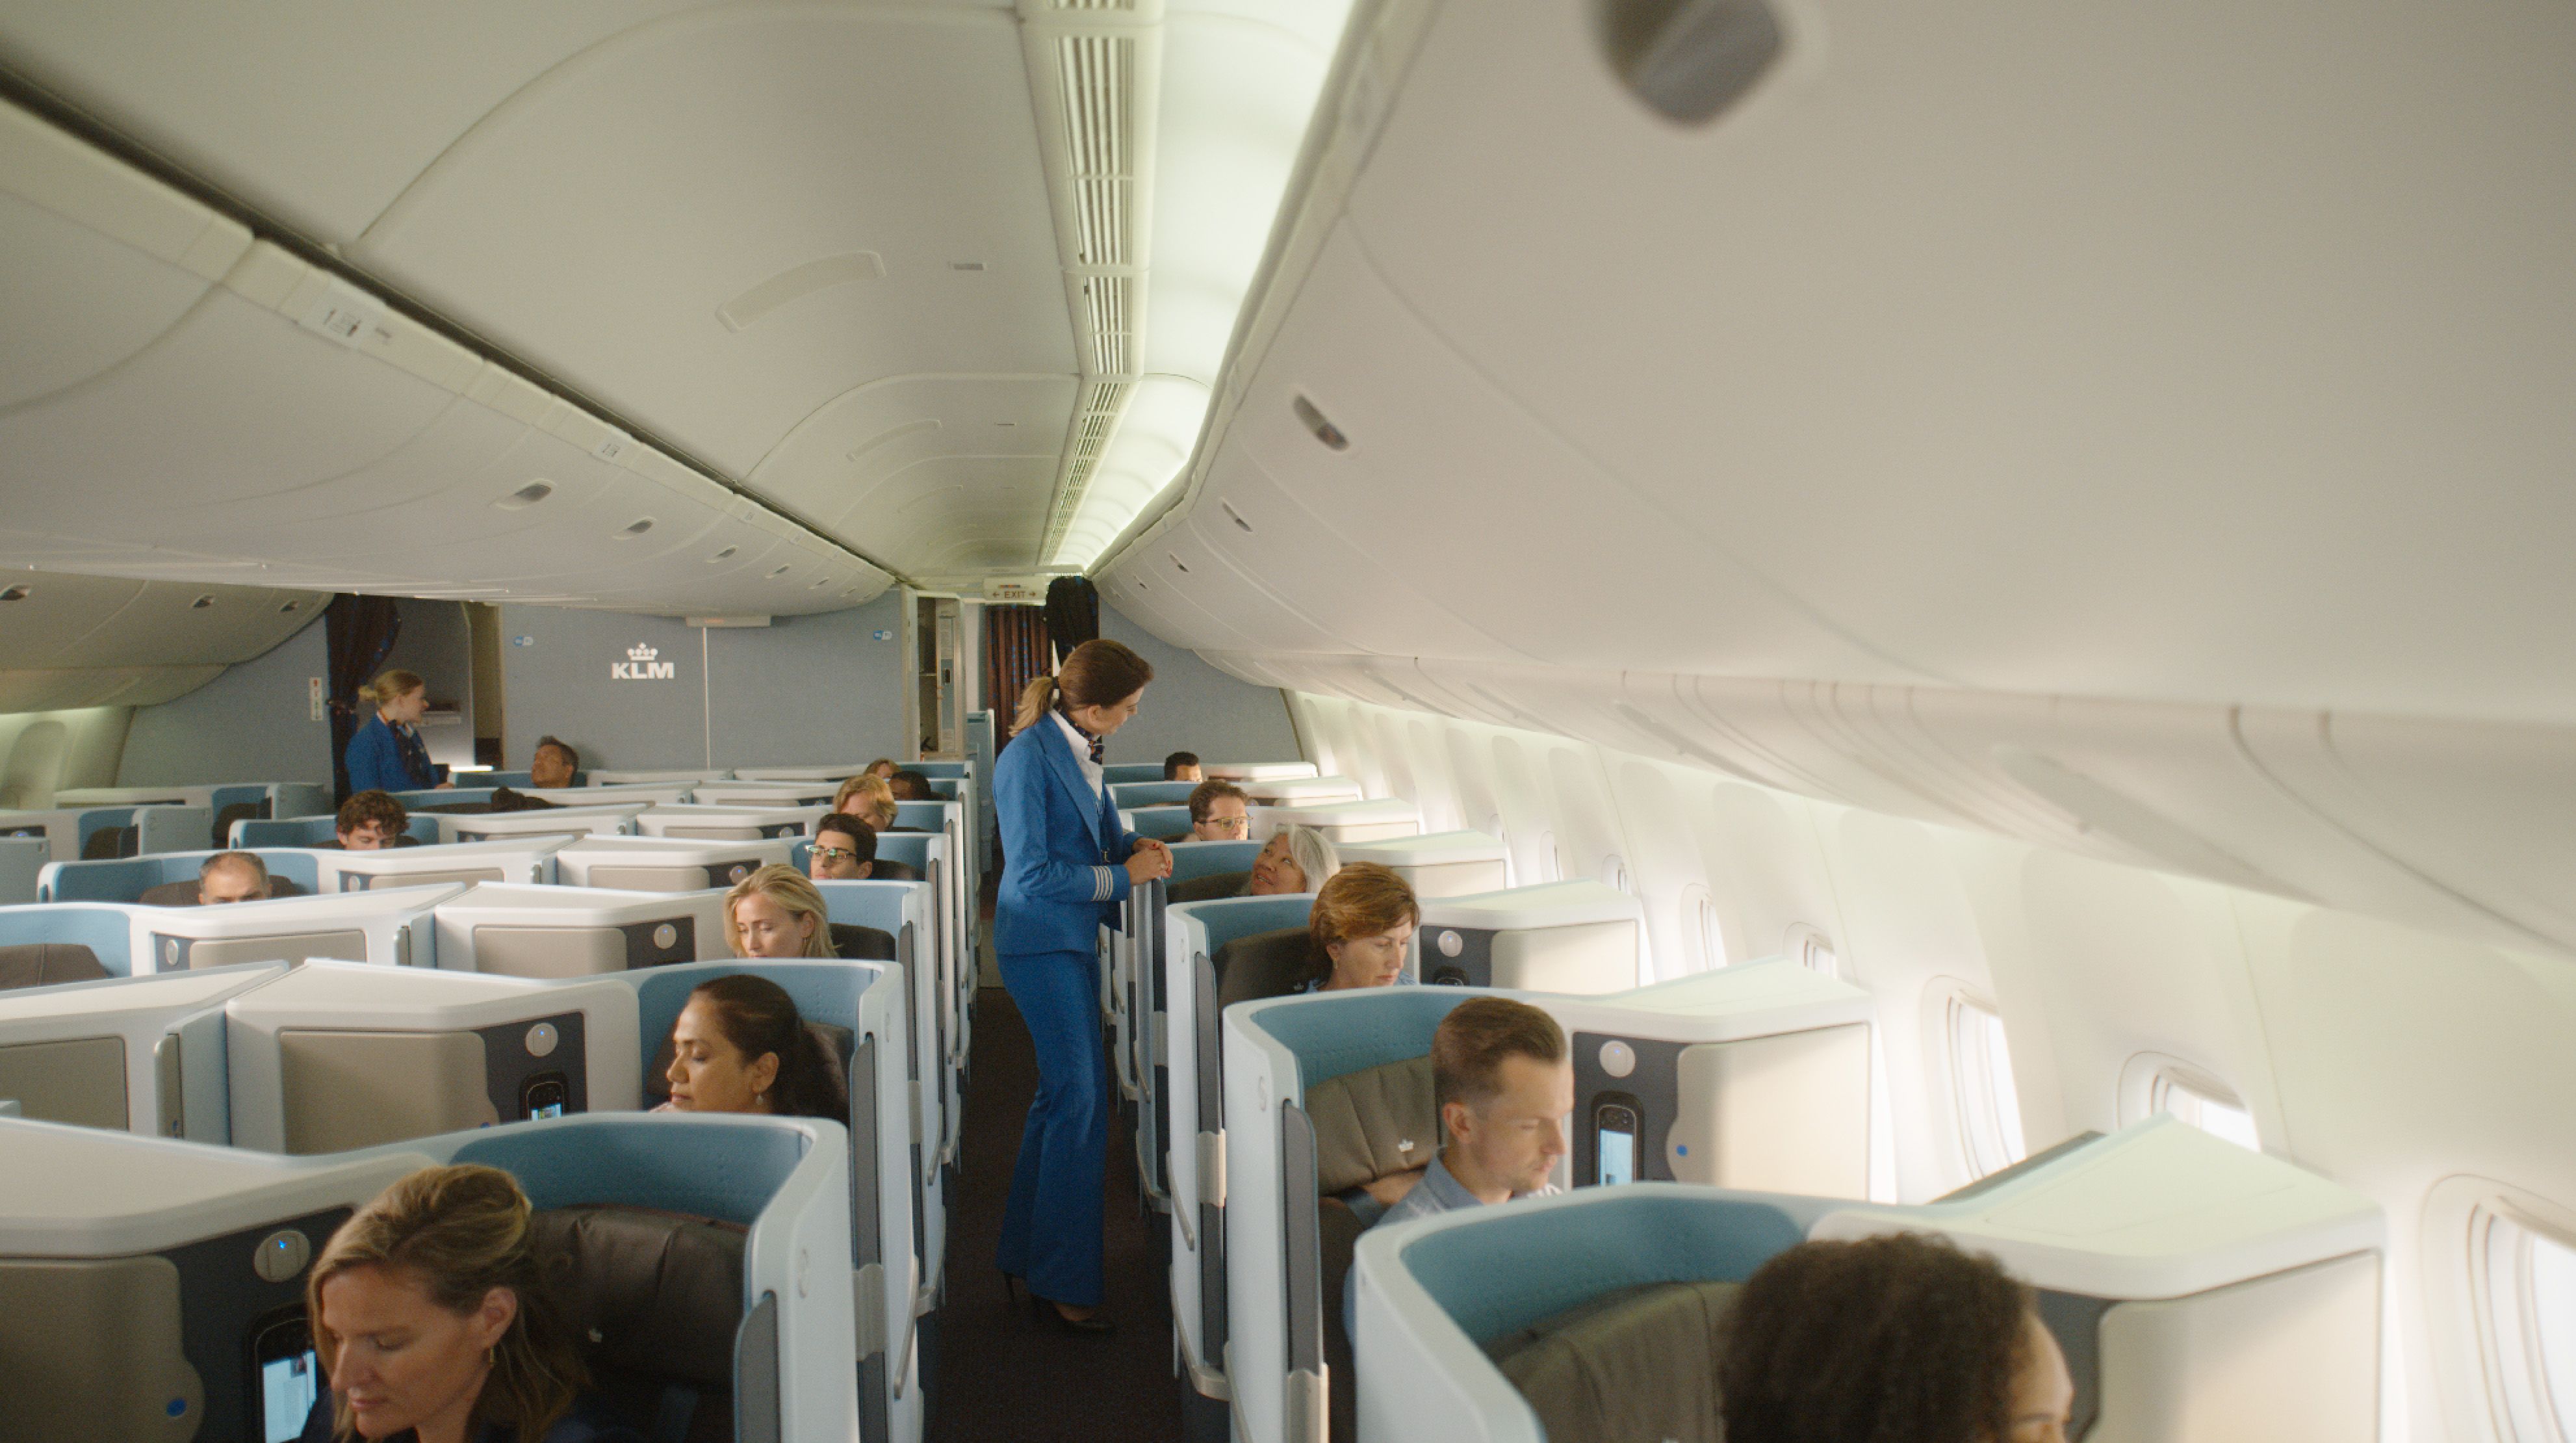 Inside the KLM Boeing 777 Business Class Cabin.